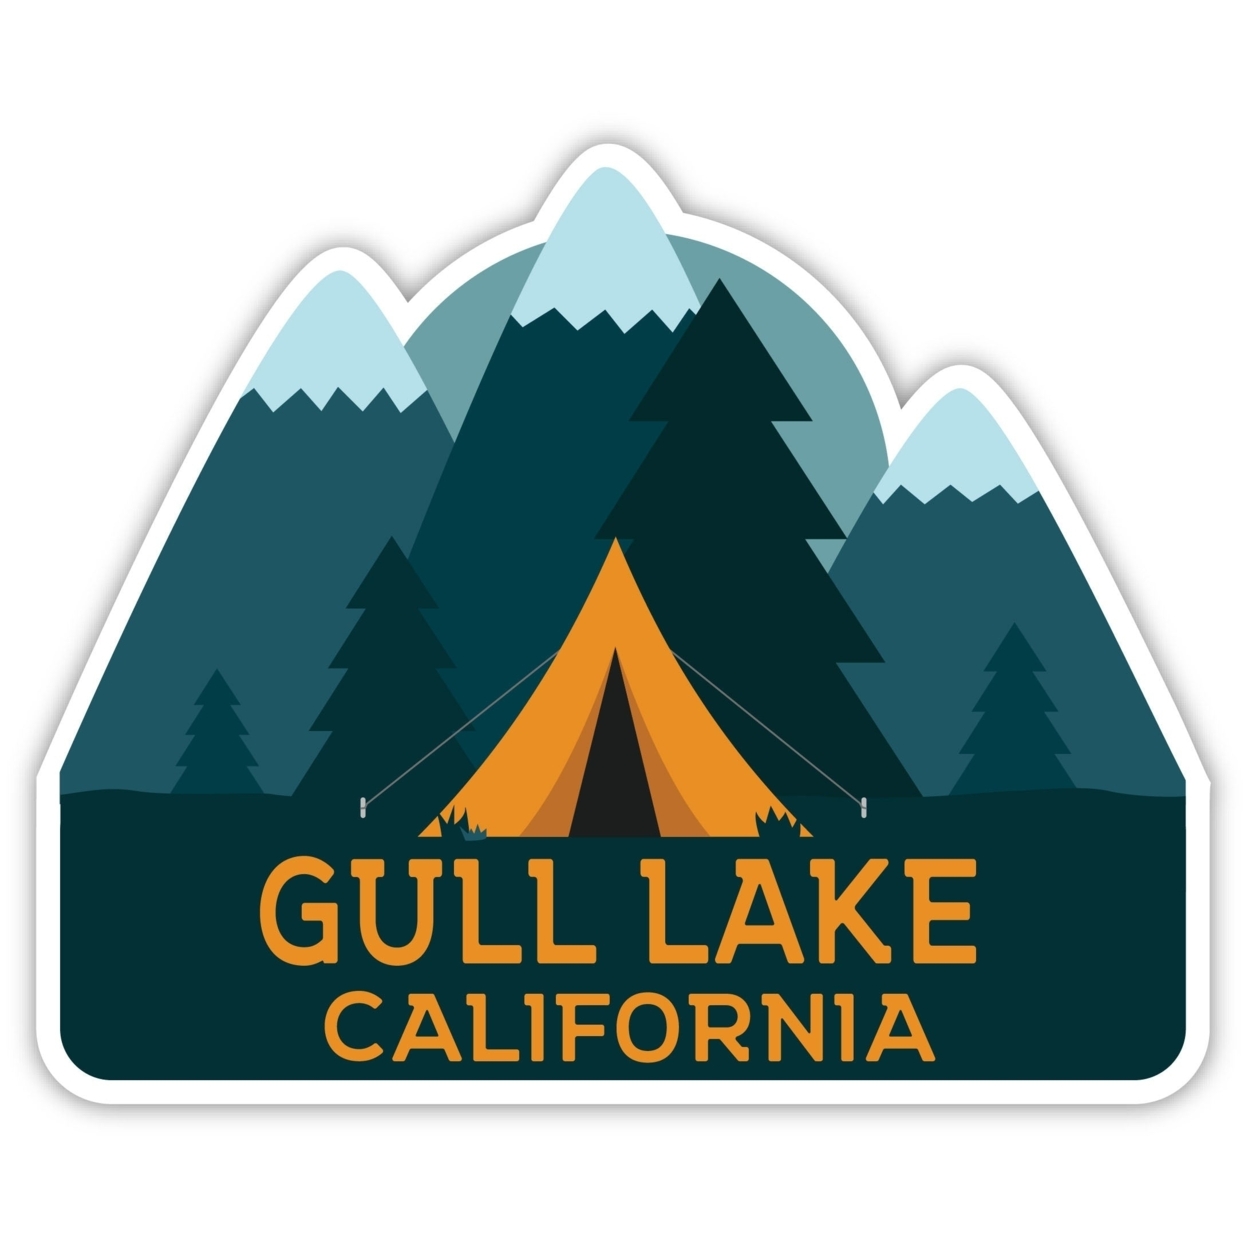 Gull Lake California Souvenir Decorative Stickers (Choose Theme And Size) - 4-Pack, 10-Inch, Bear